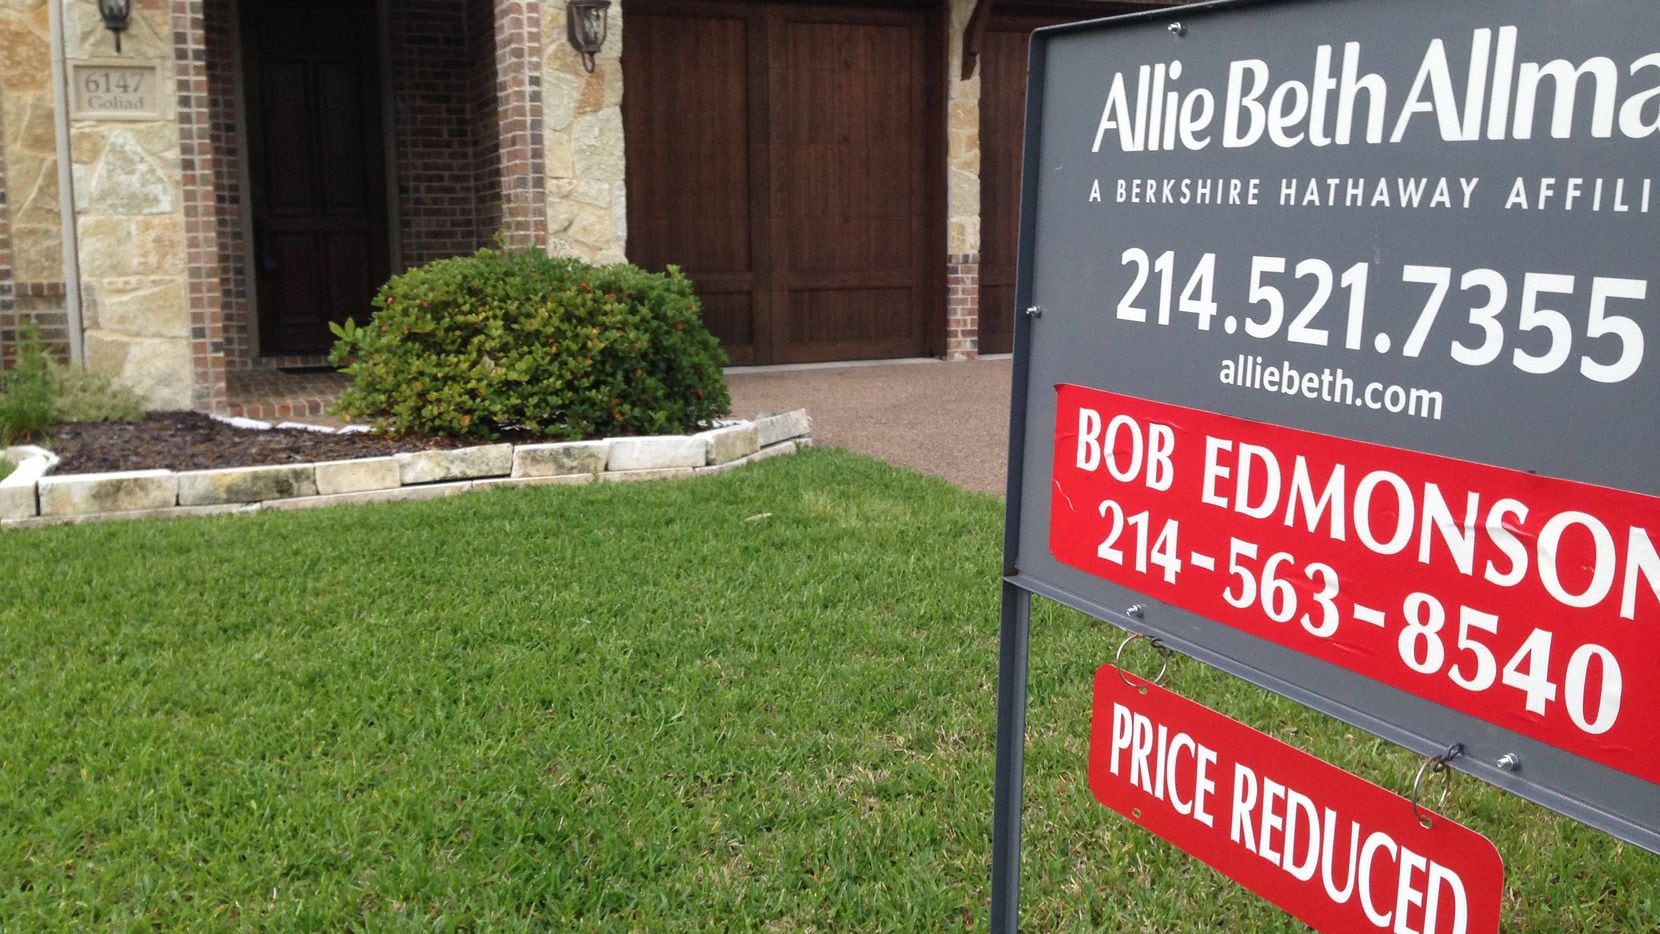 Realtor.com is forecasting lower home prices in about a fourth of U.S. markets next year.